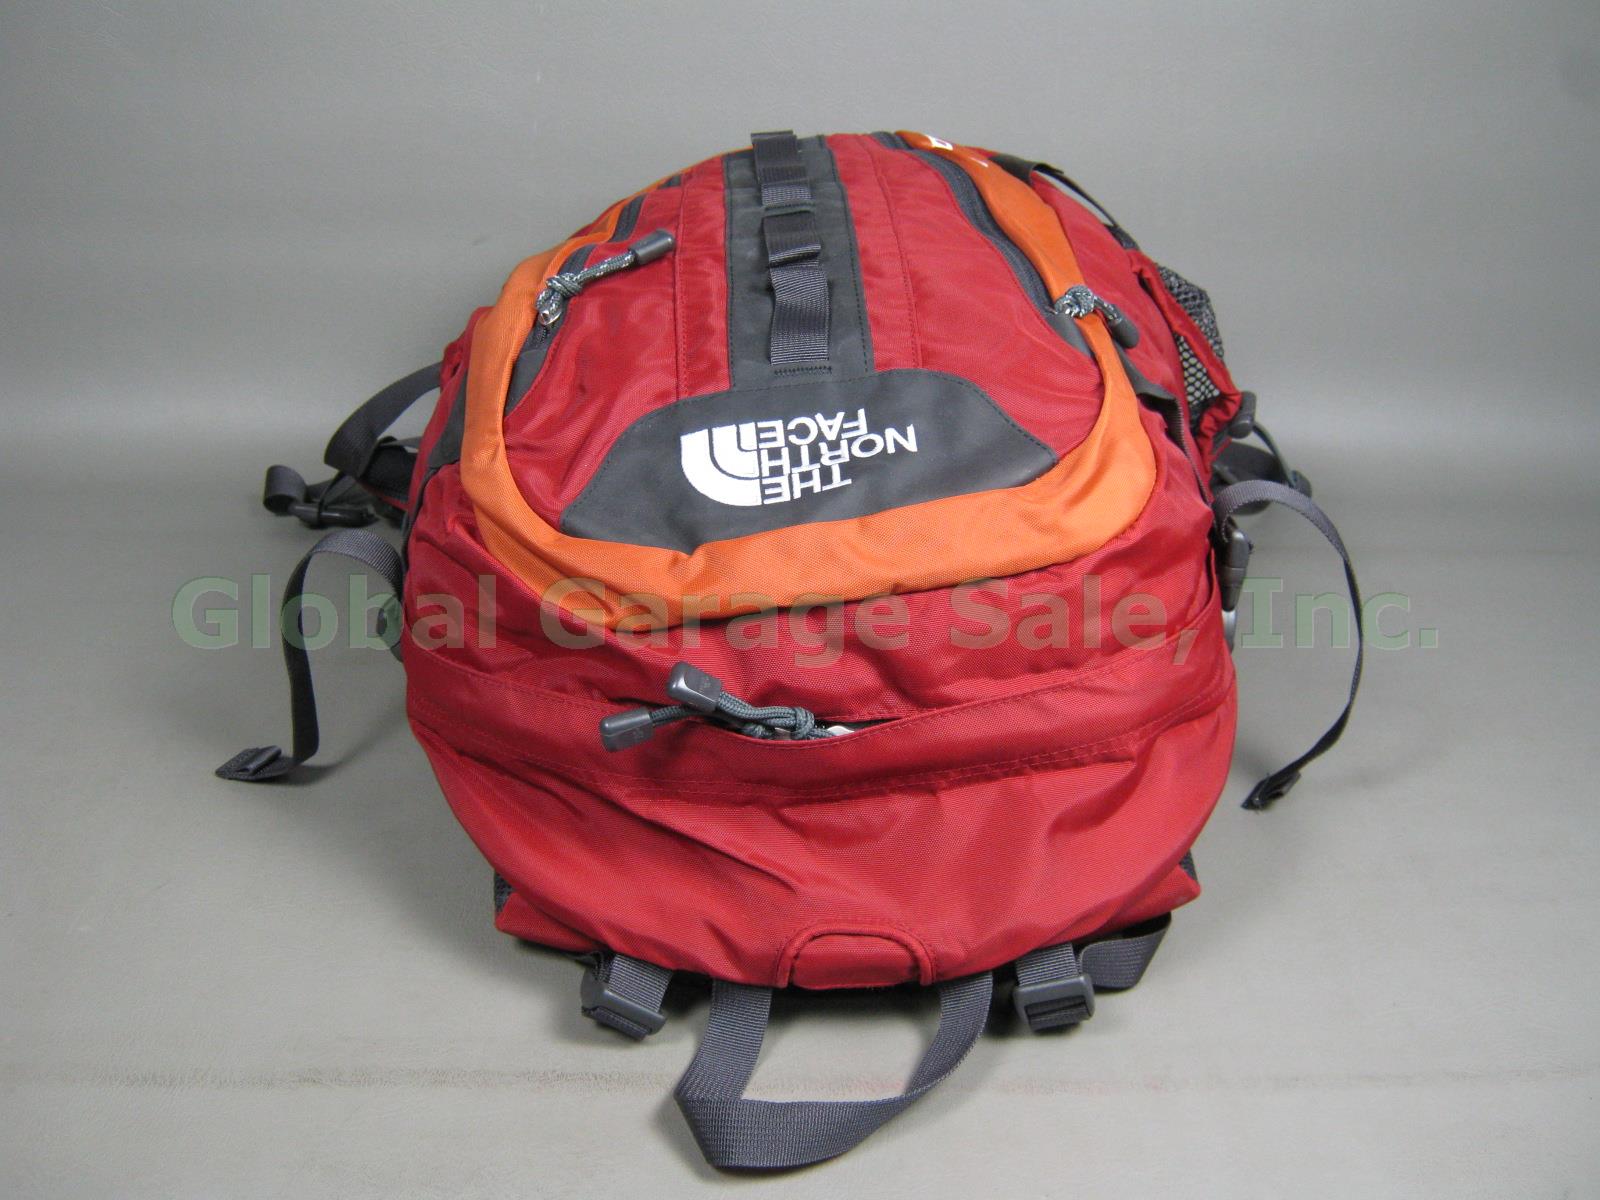 NEW NWT The North Face Big Shot Backpack Day Pack Laptop Book Bag Cardinal Red 2